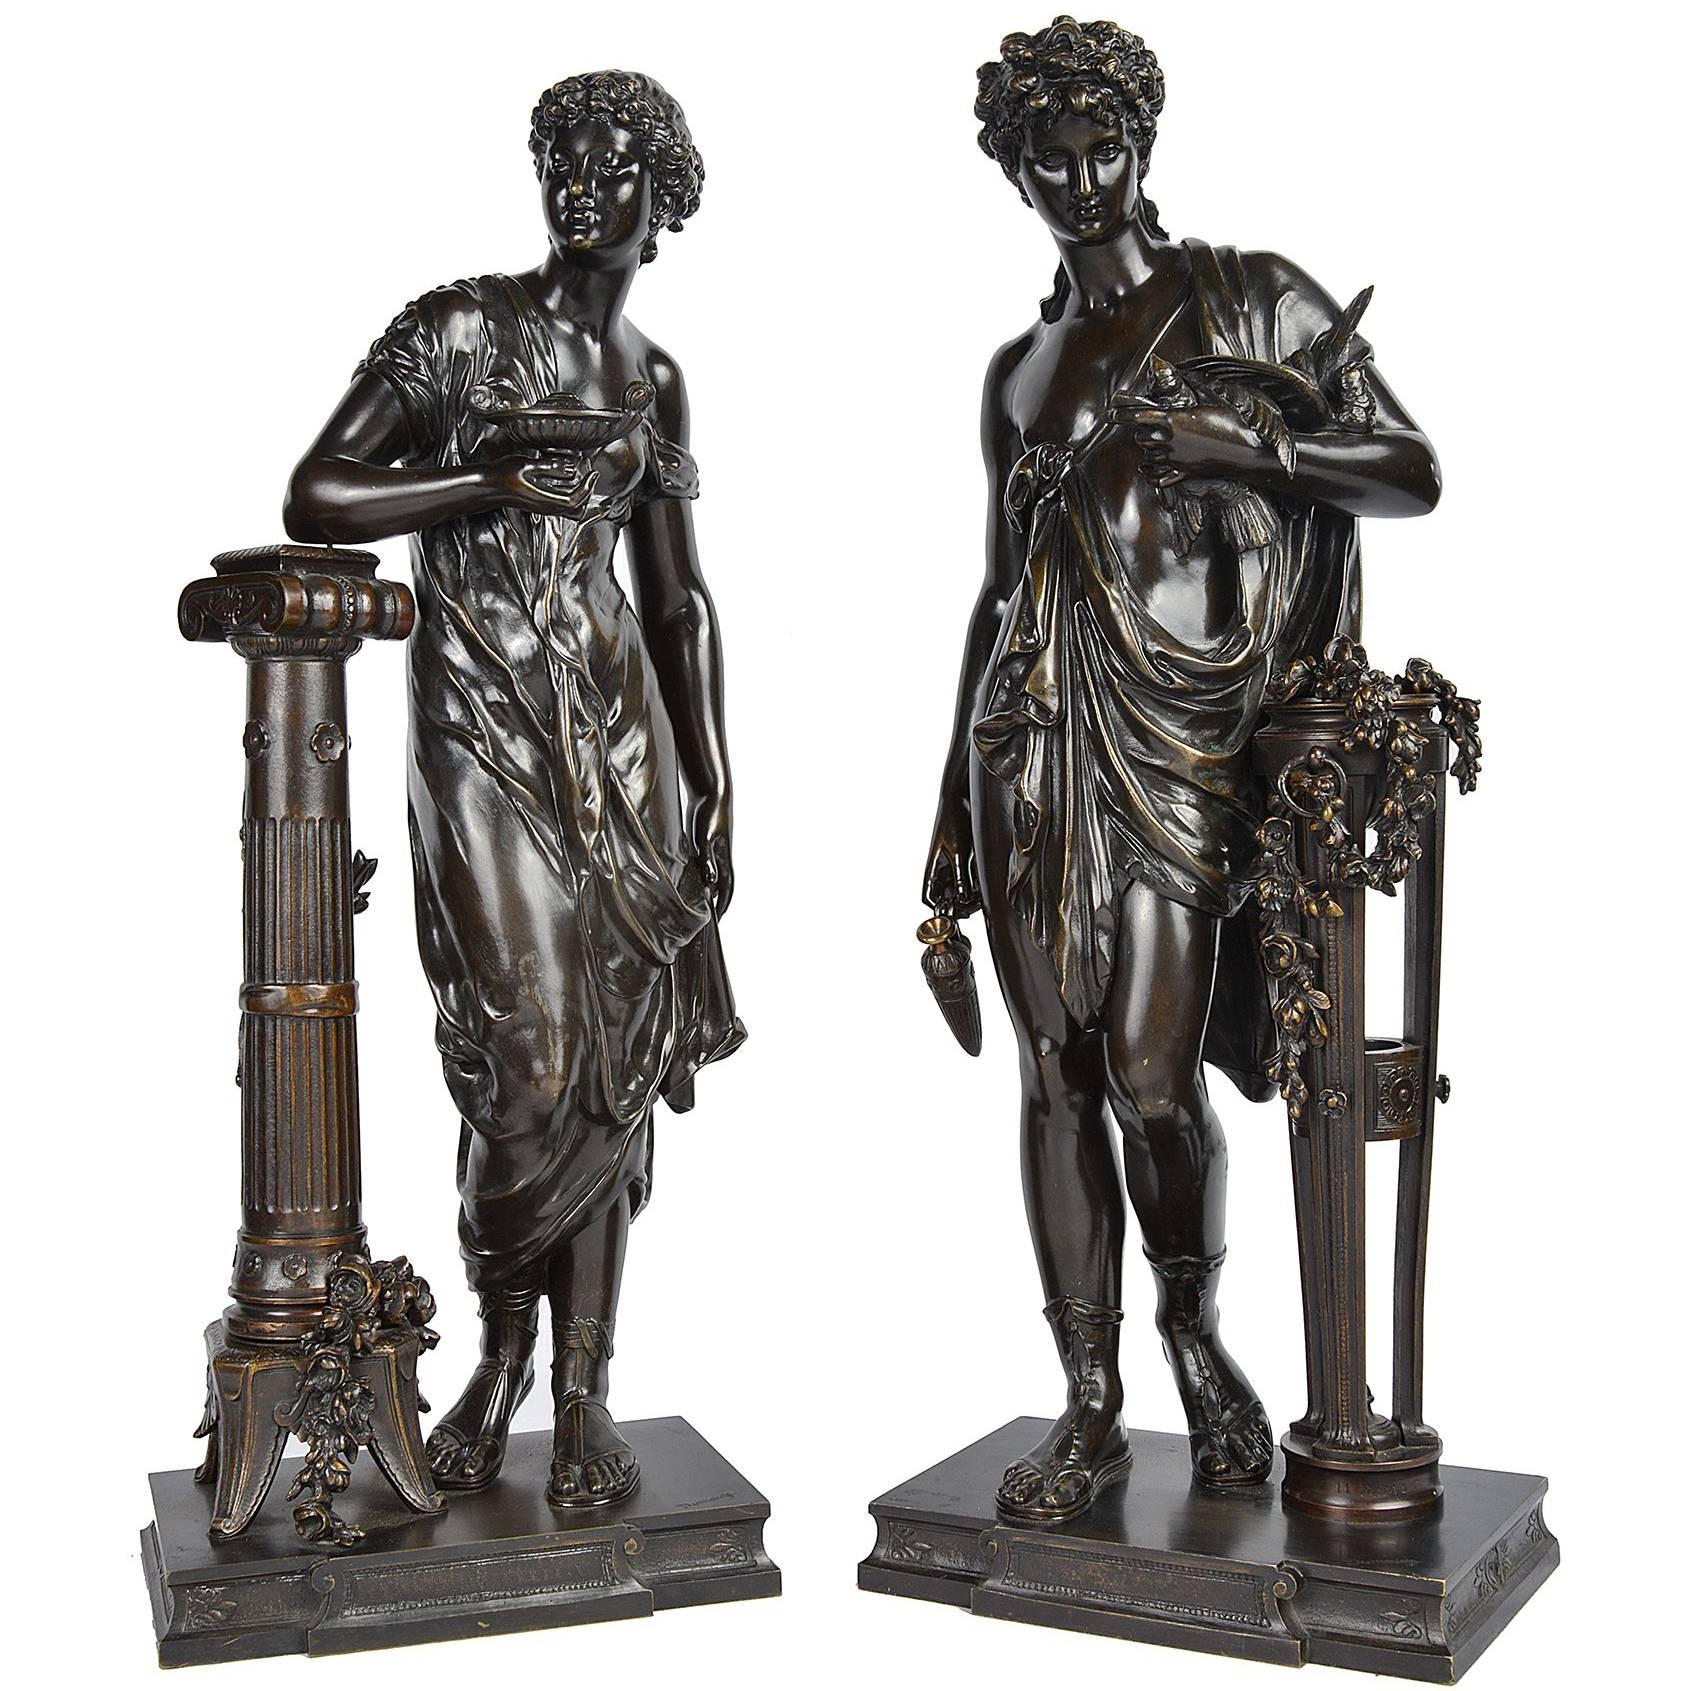 Pair of Classical Grecho Bronze Statues of Classical Females by Dumaige